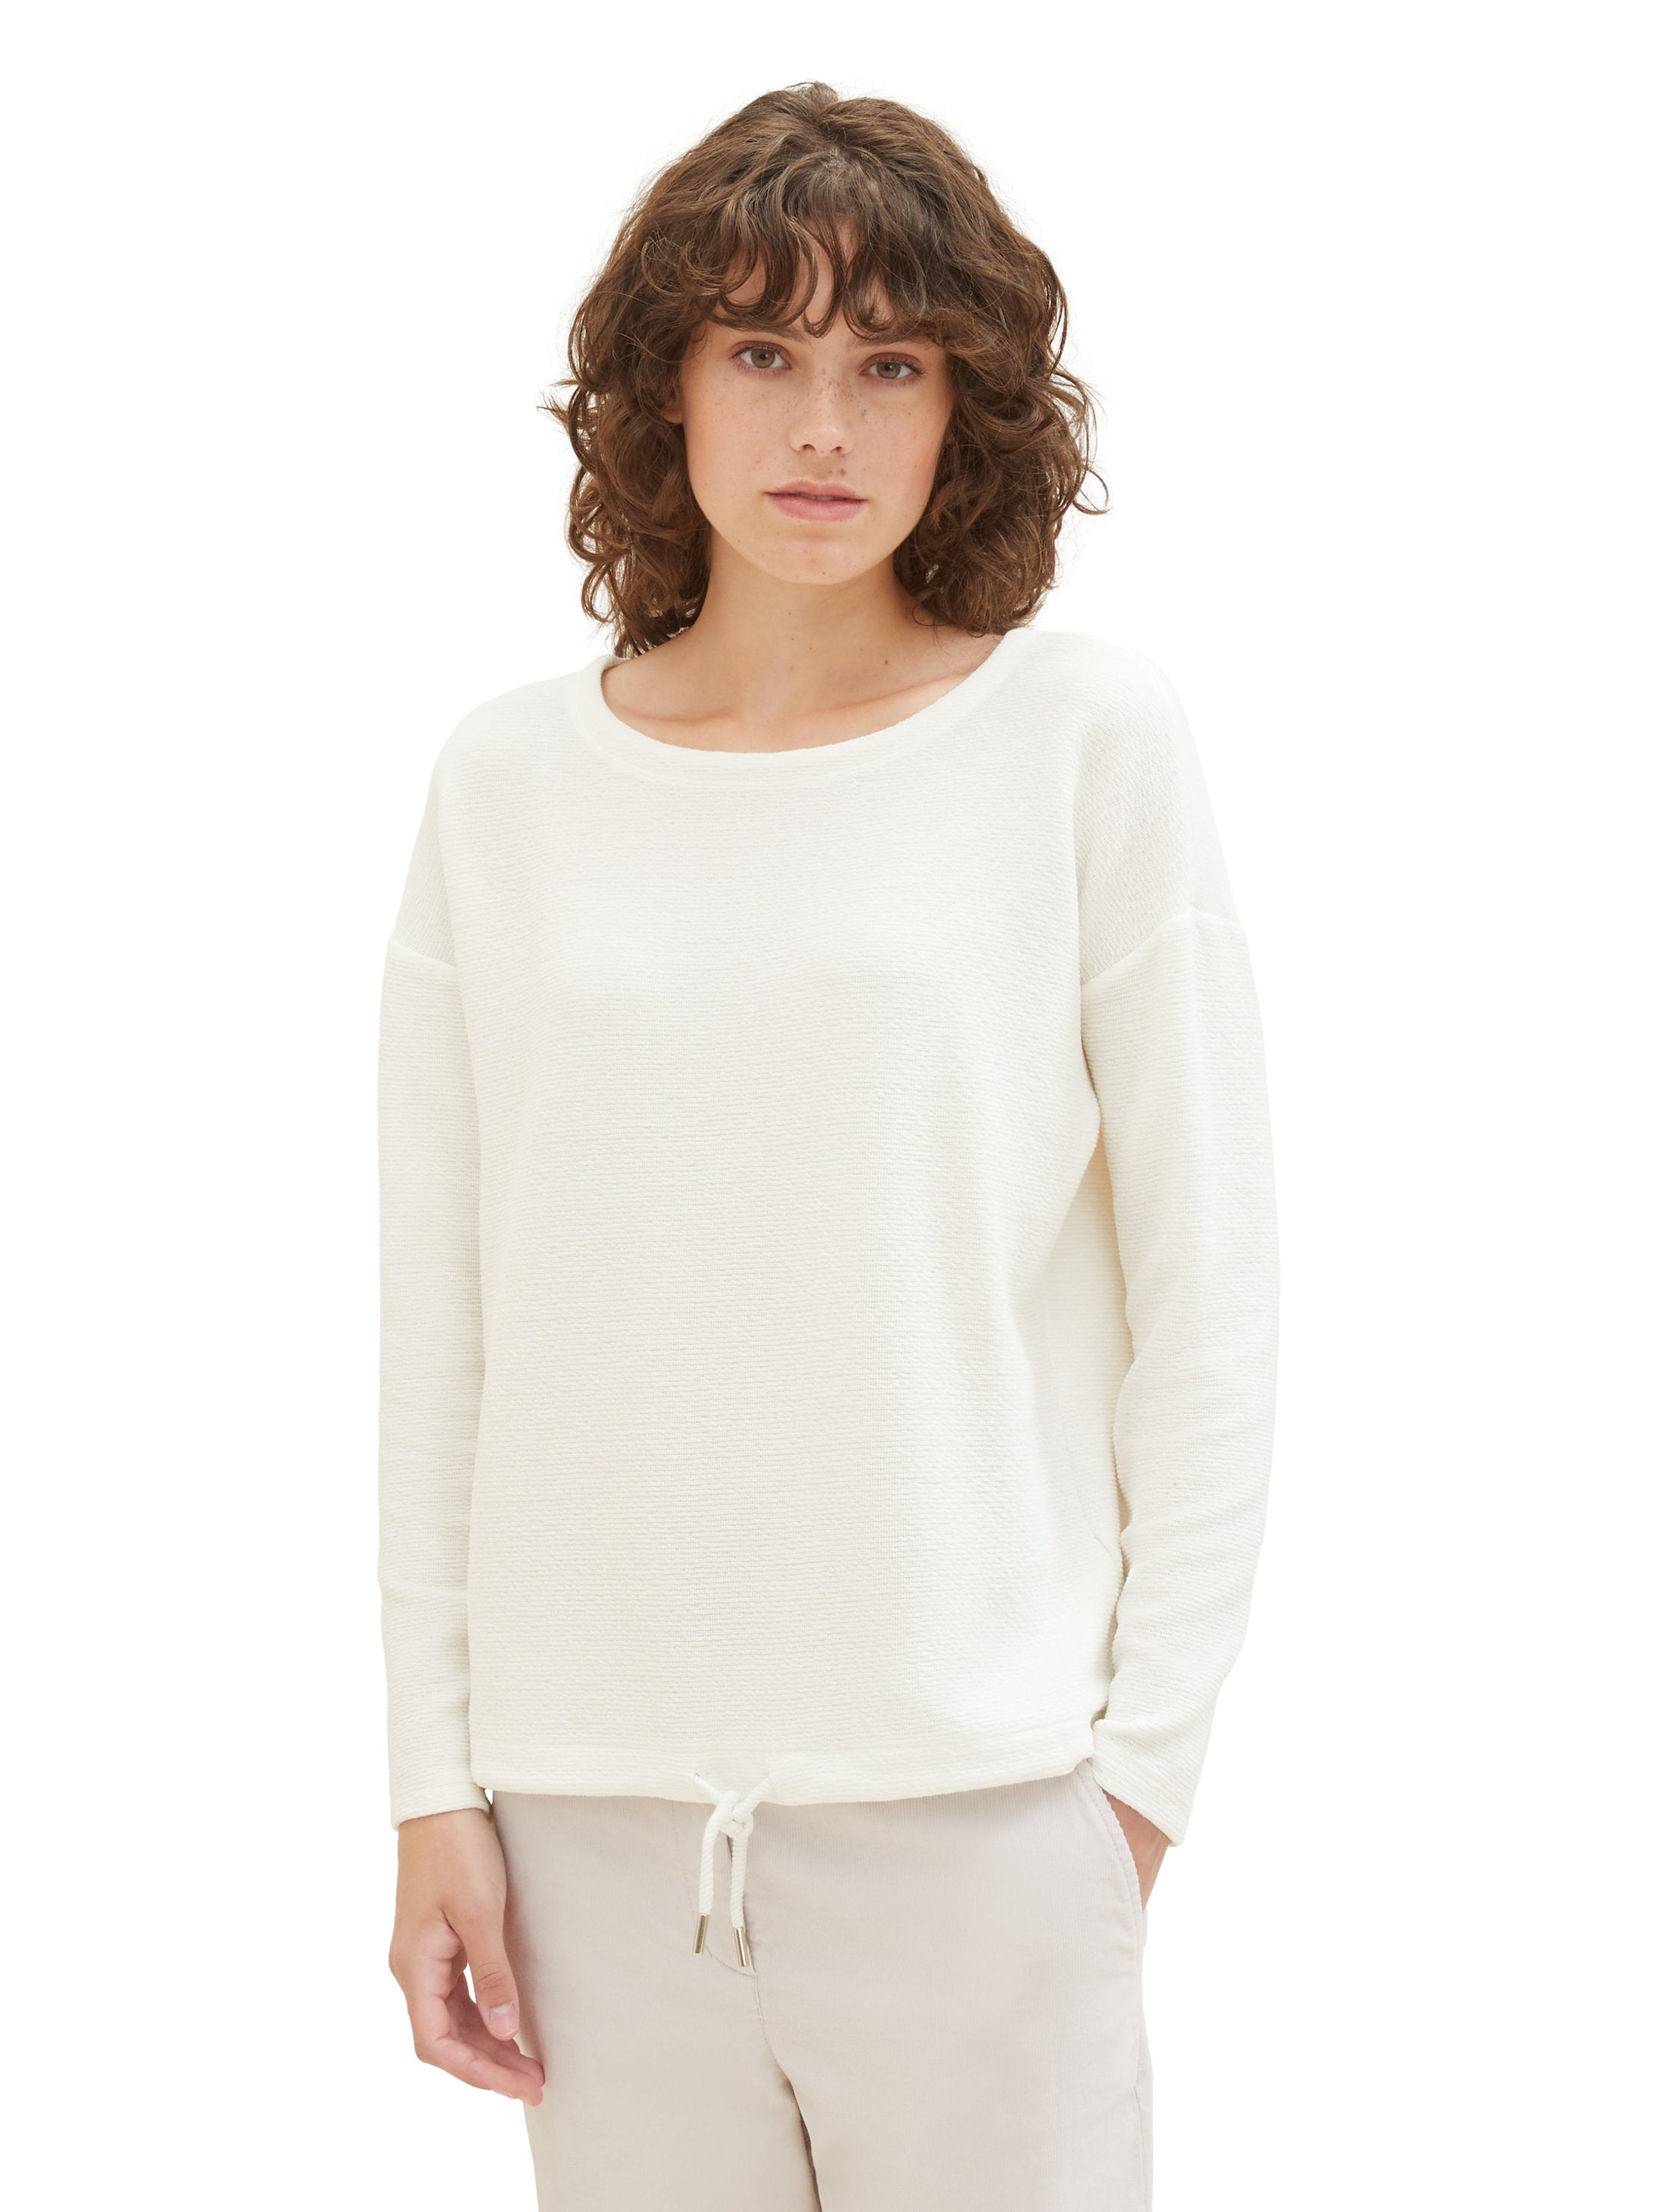 Long Sleeve T Shirt With Wide Round Neckline_1038177_10315_06